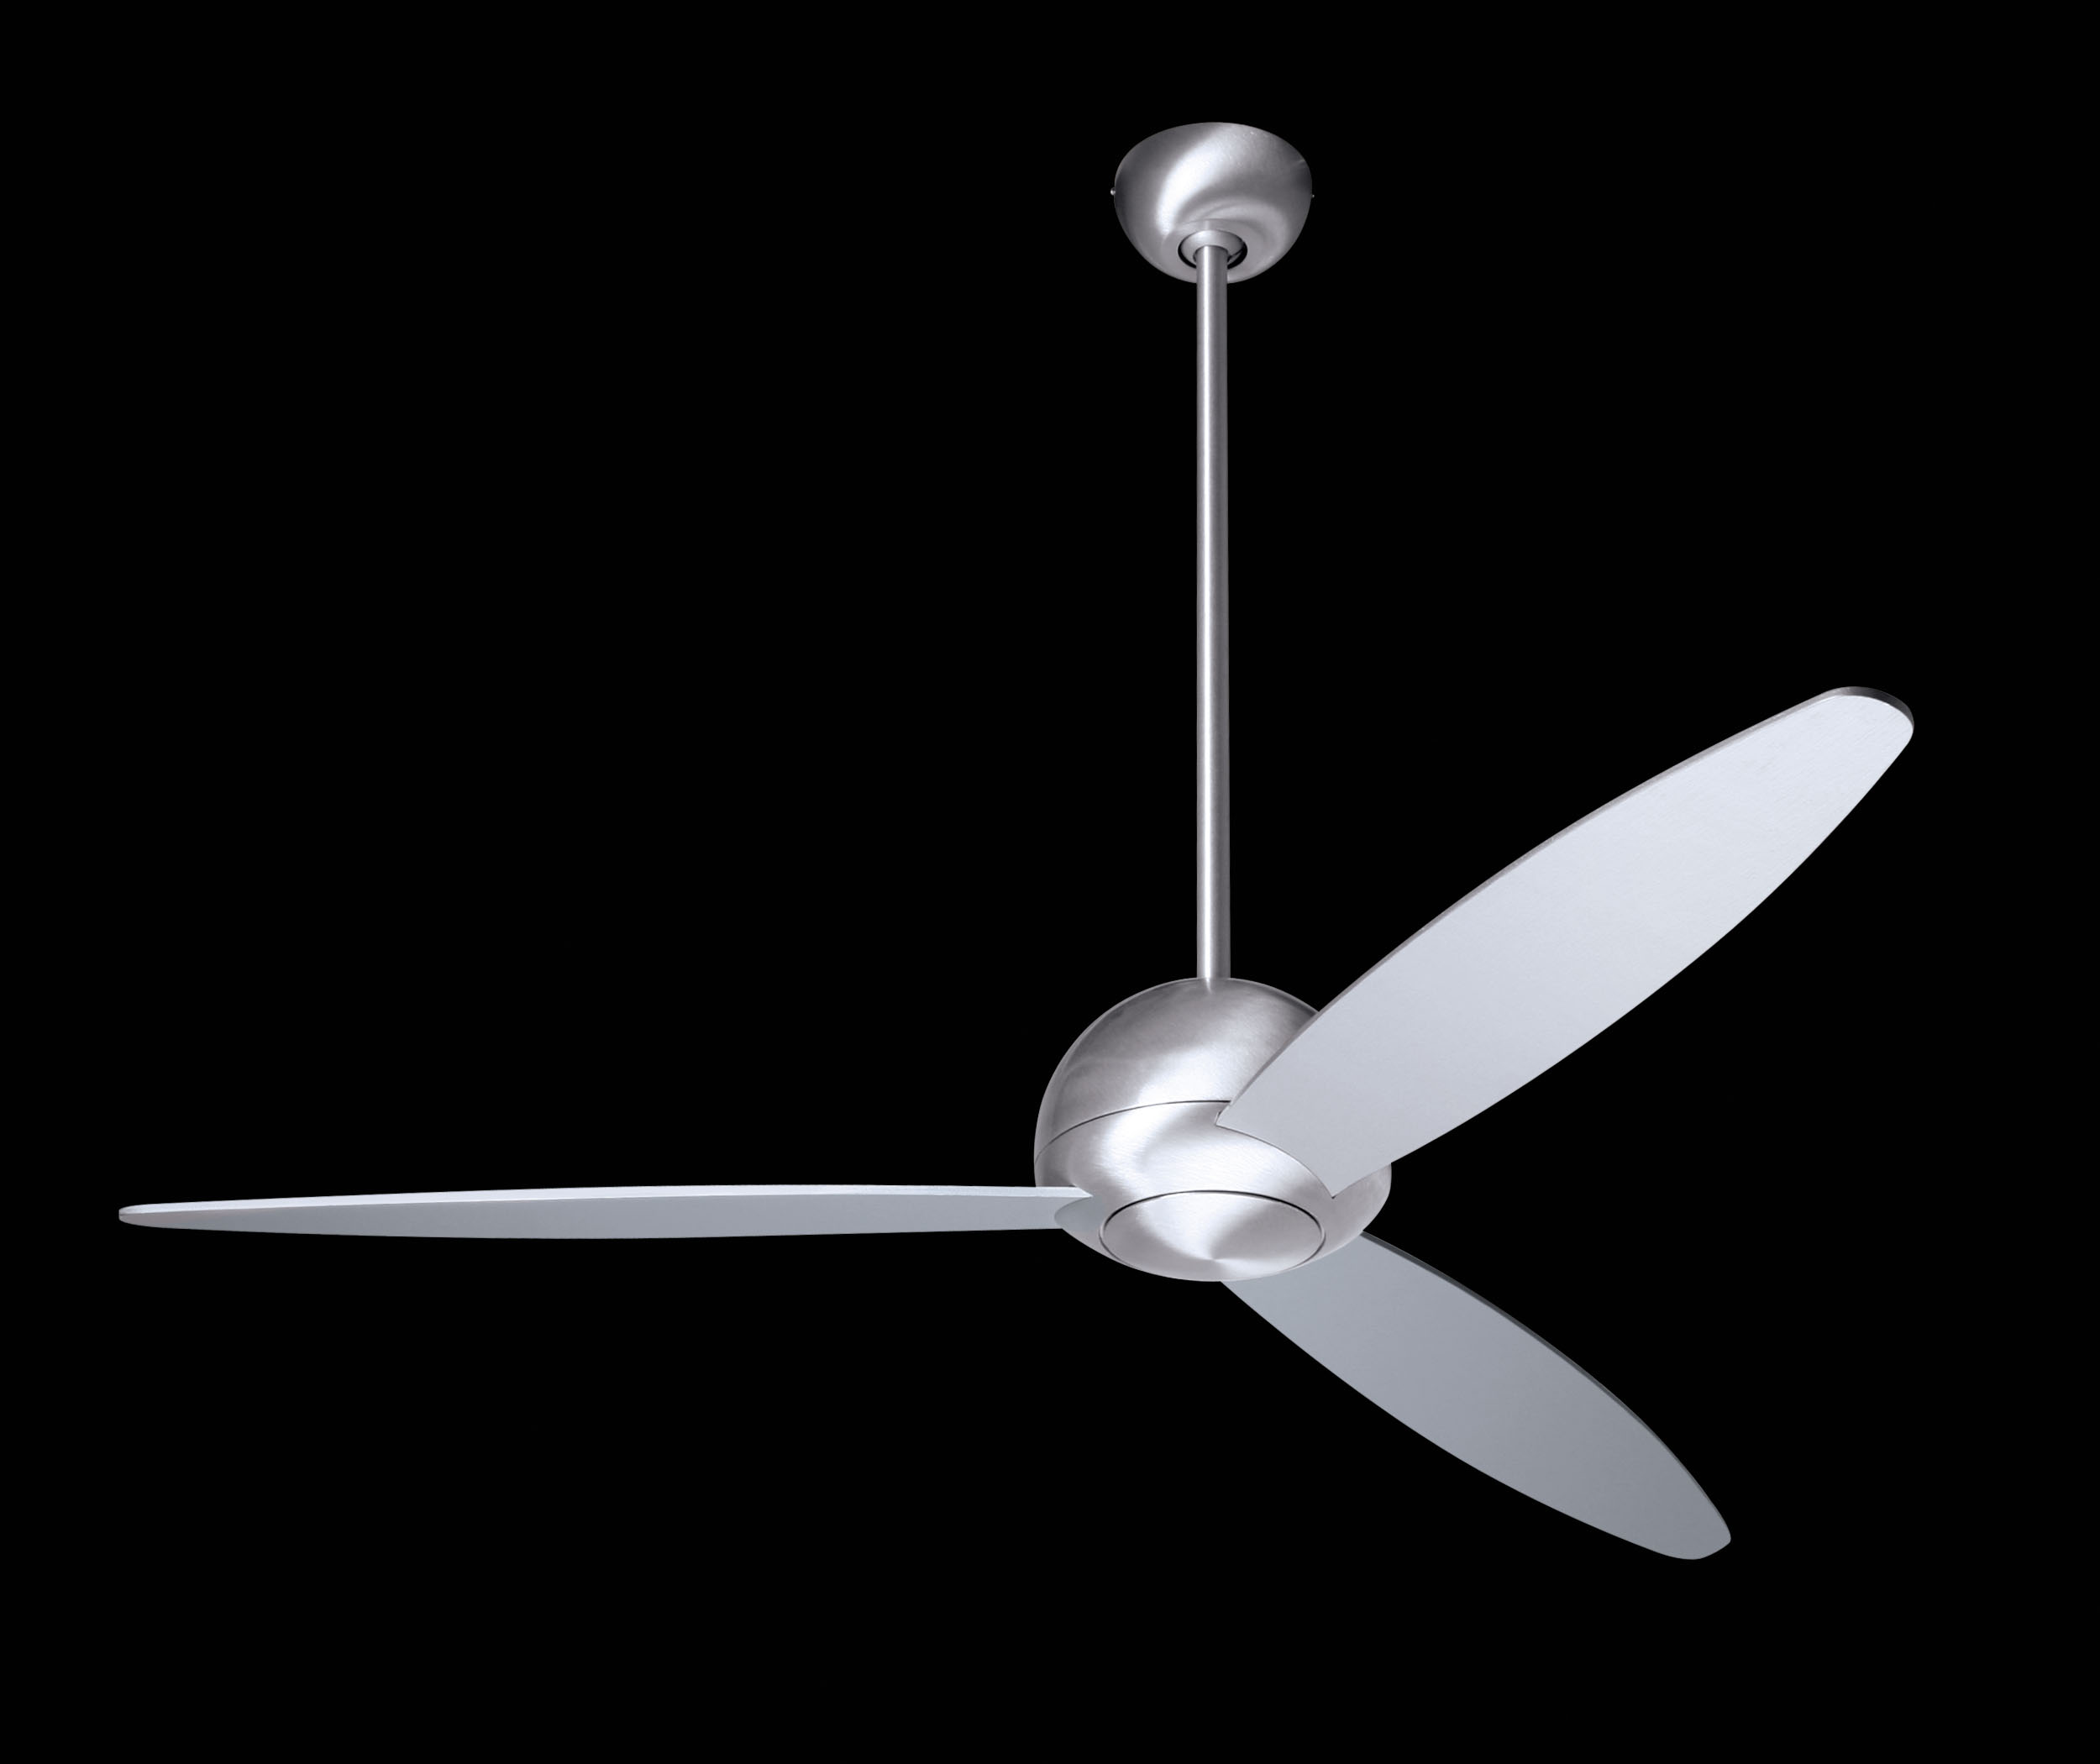 Lumens.com Introduces New 2011 Ceiling Fan Designs from The Modern Fan